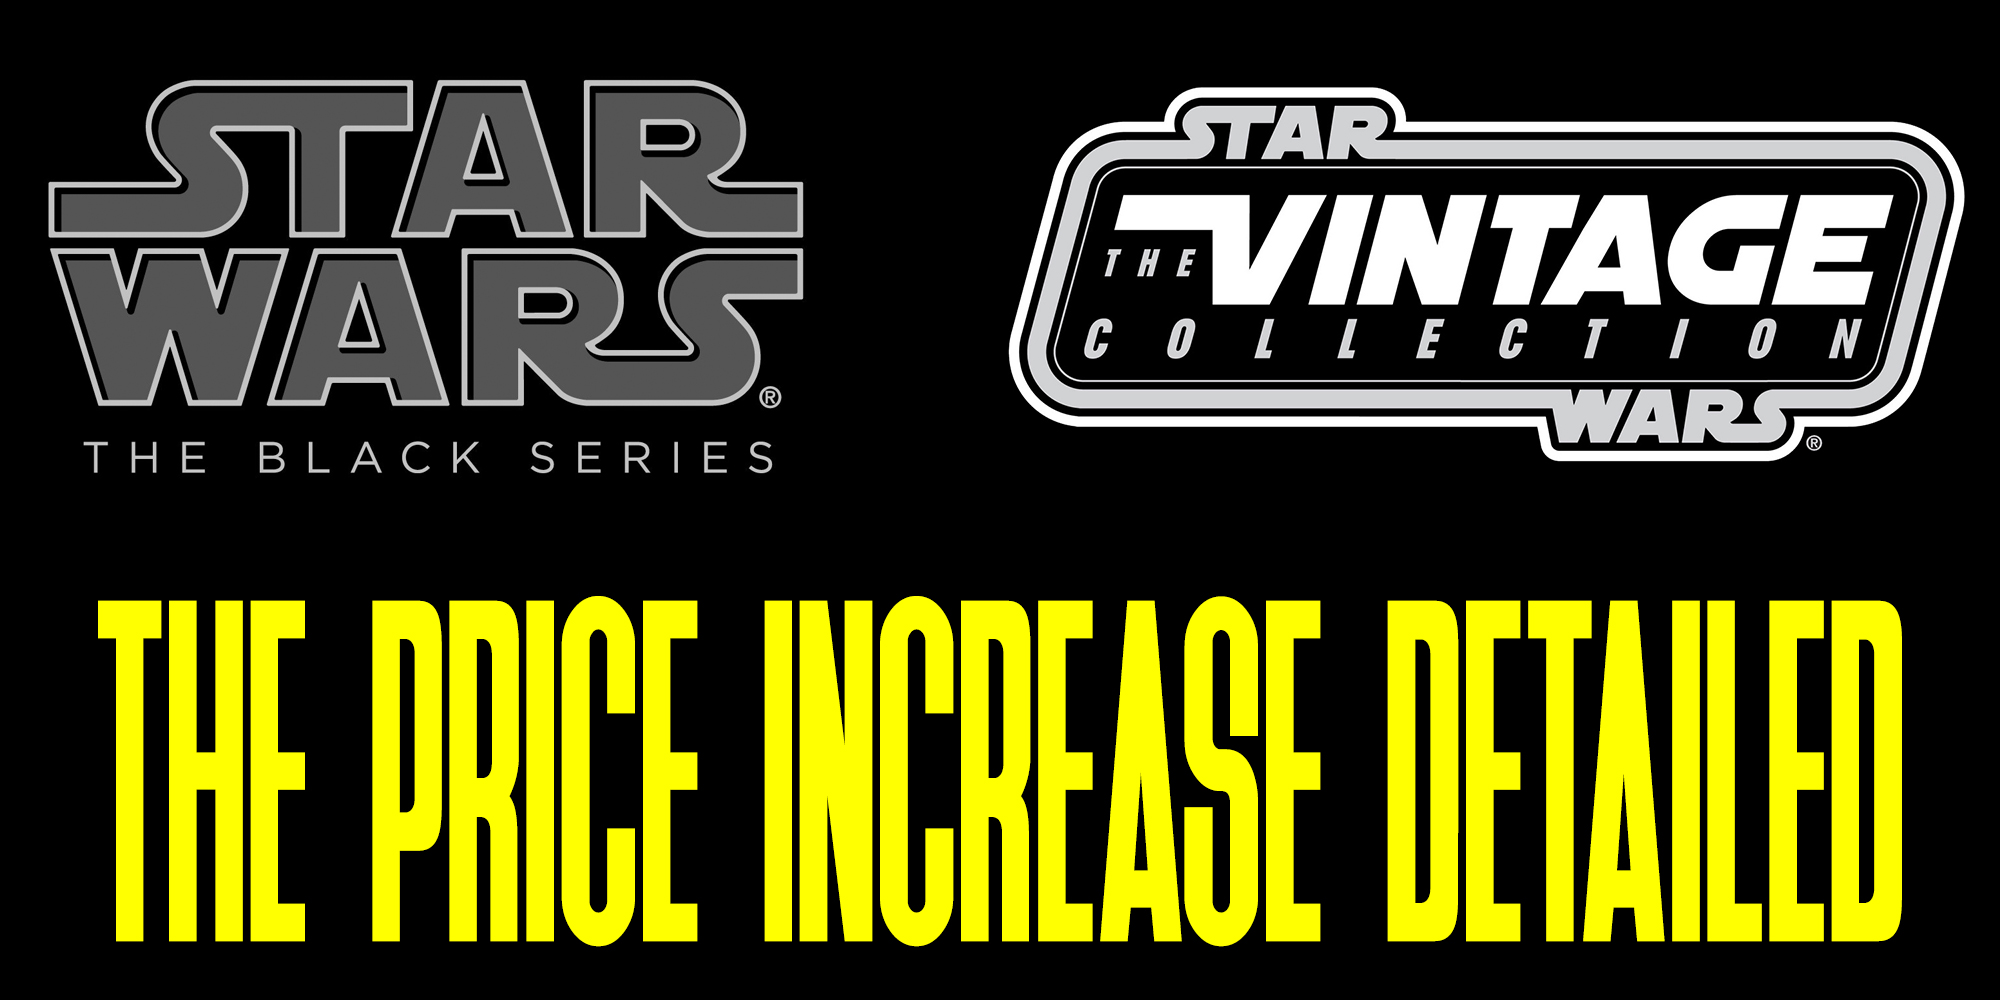 The Star Wars Action Figure Price Increase Detailed